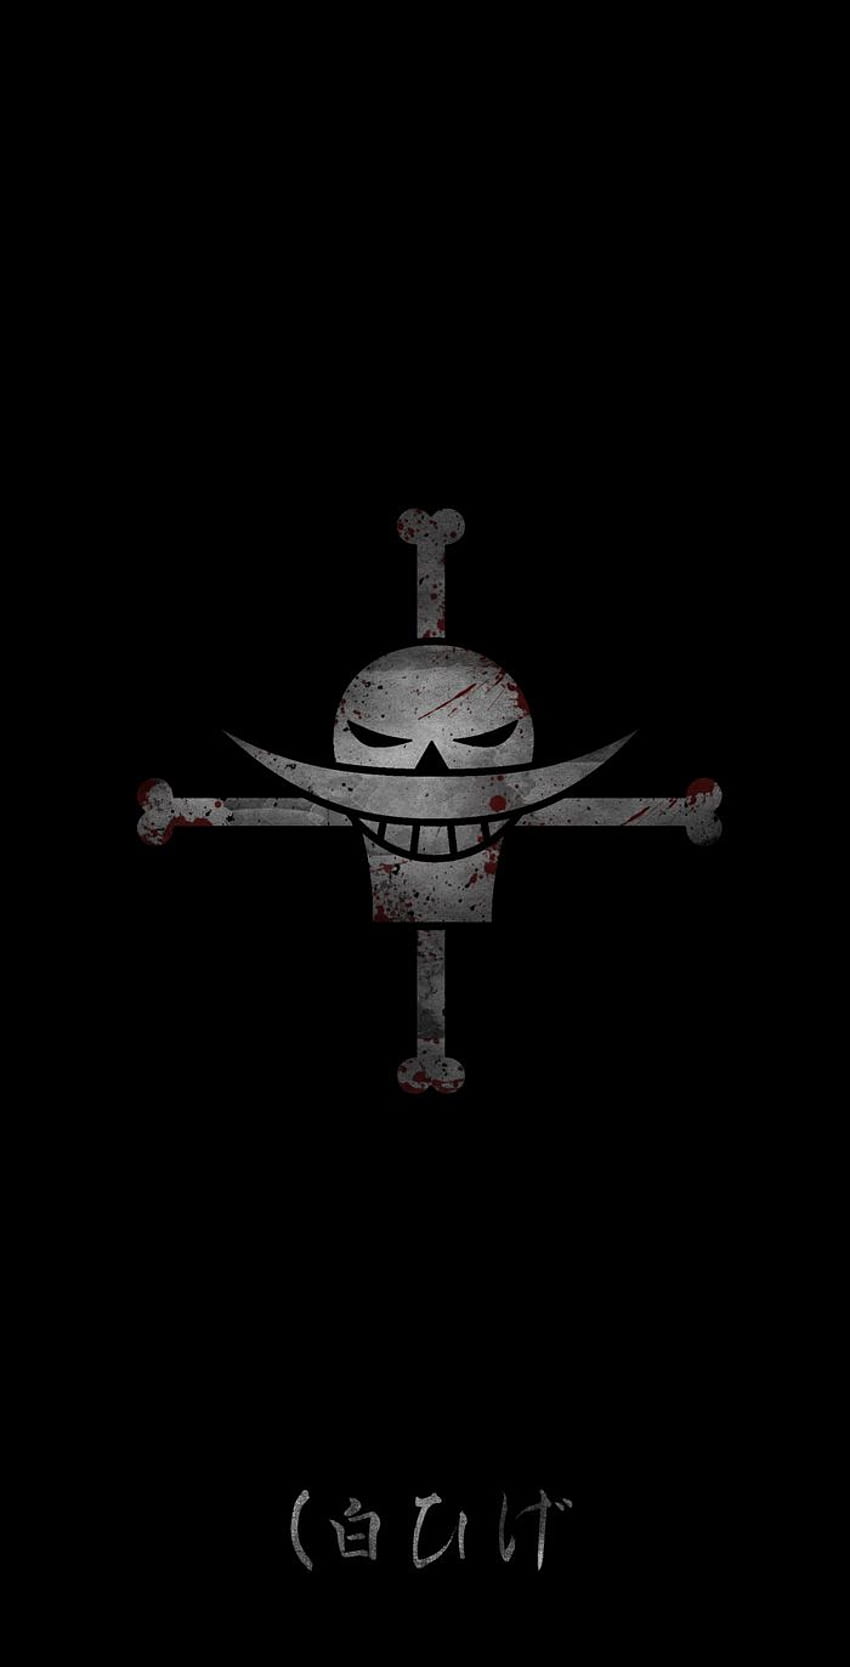 I Made Edited Whitebeard's Jolly Roger For Dark Themed Phone . : OnePiece HD phone wallpaper